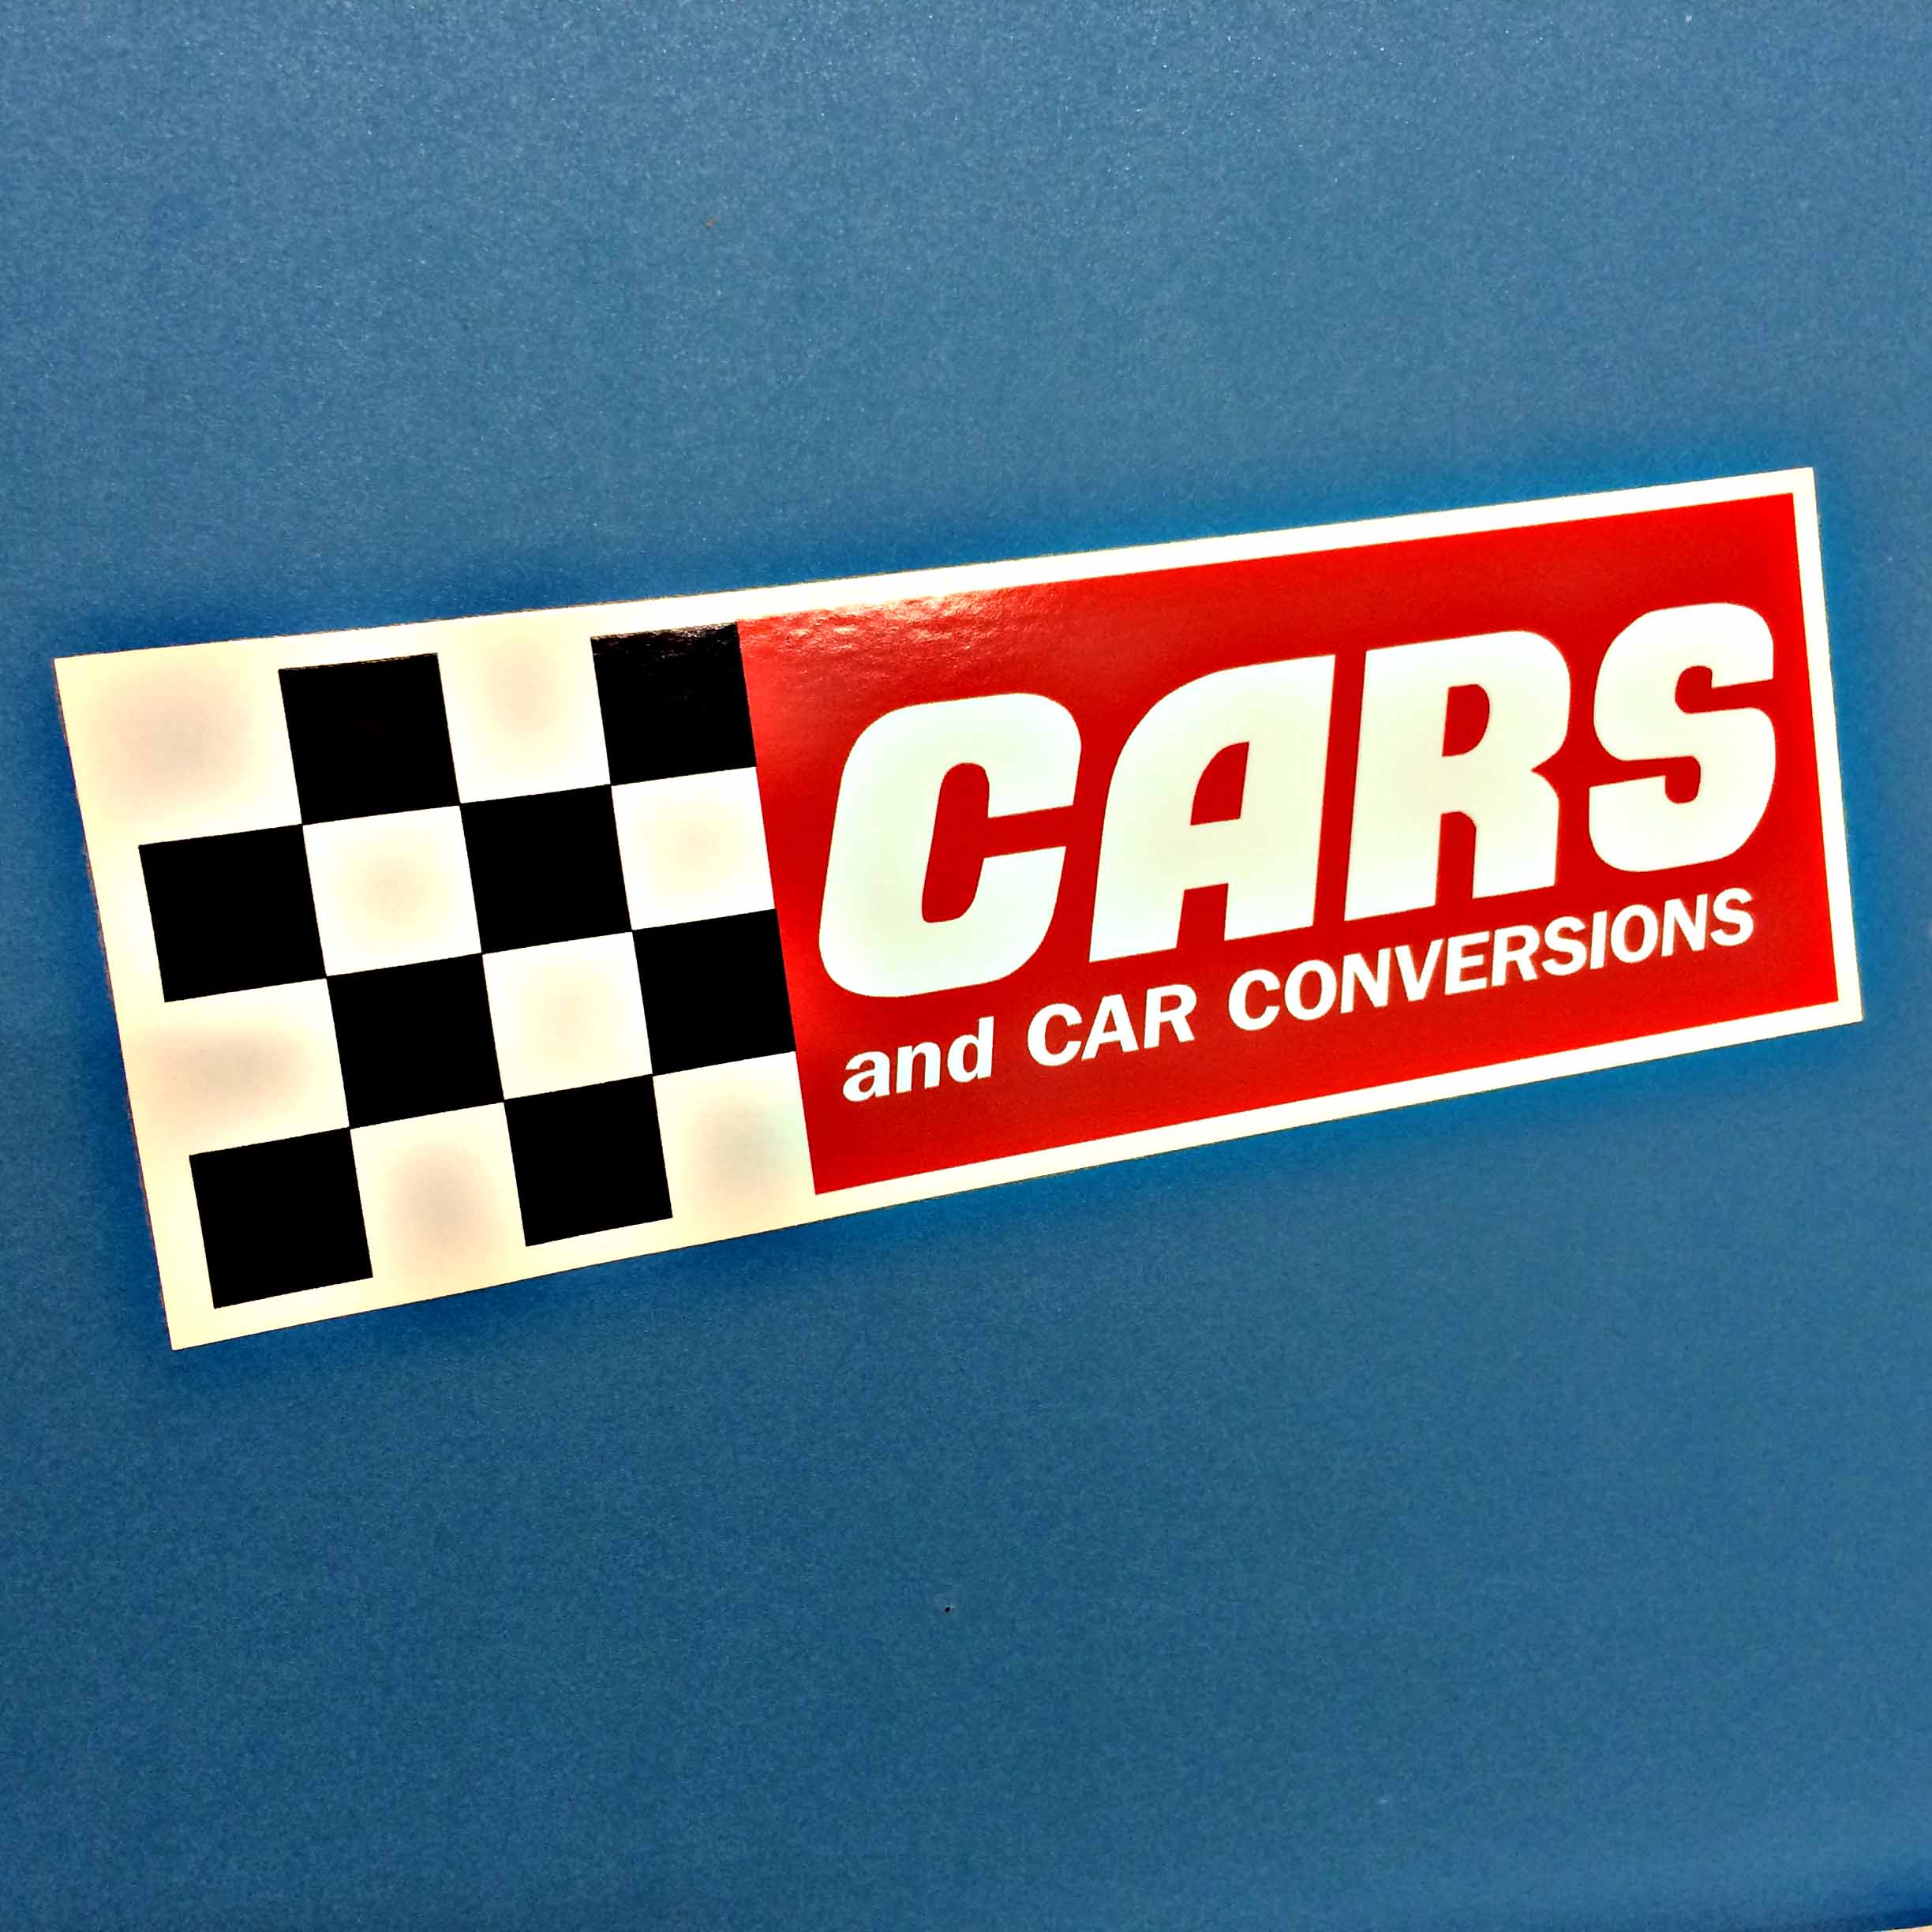 Cars and Car Conversions in white uppercase lettering on a red rectangular background next to a black and white chequer square.